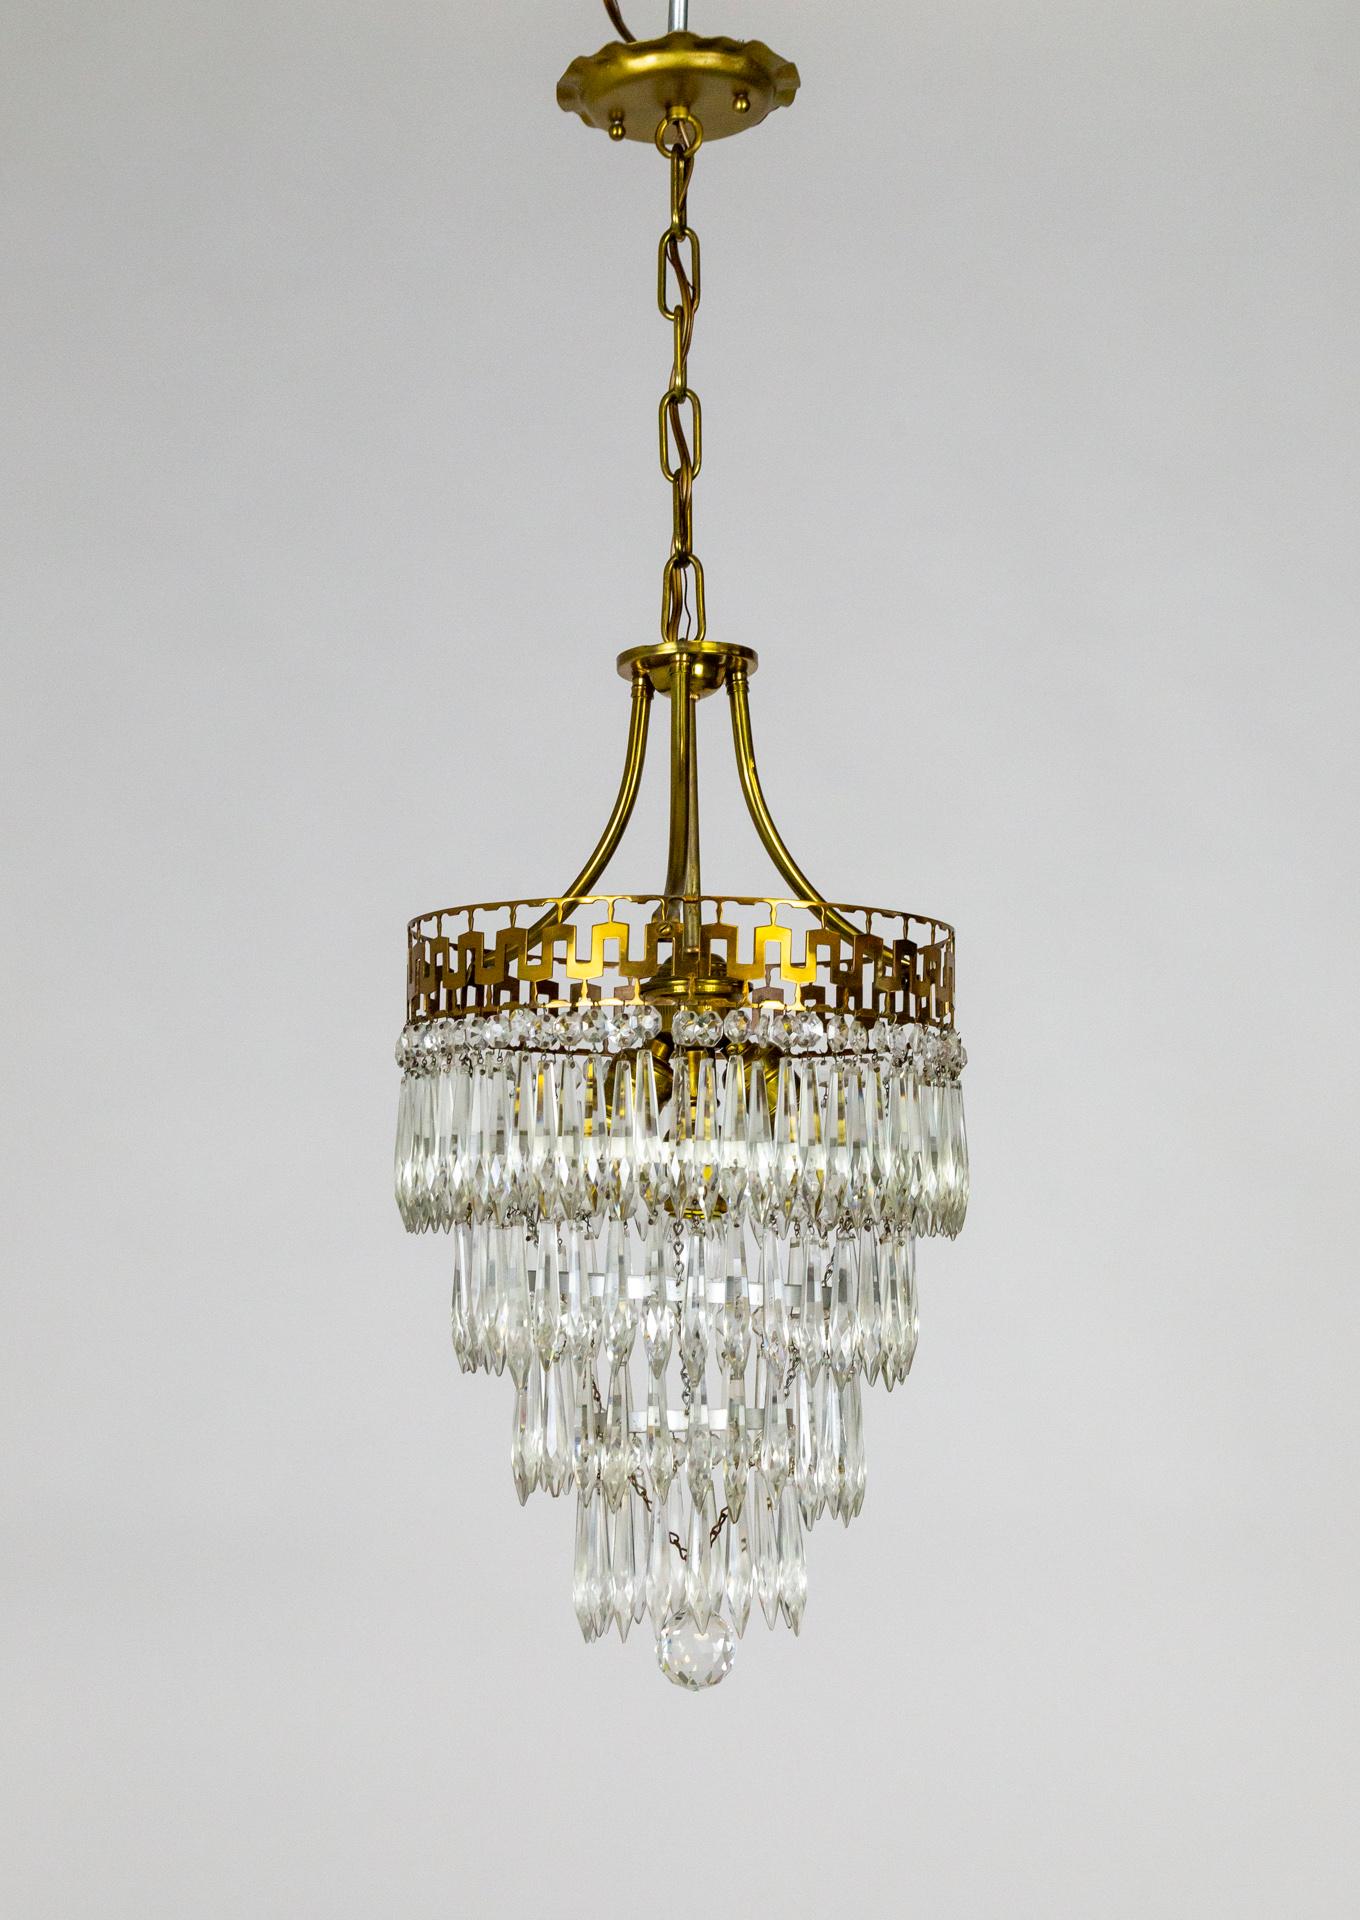 Mid-20th Cent. Neoclassical Cut Brass & Crystal Wedding Cake Pendant Light For Sale 5